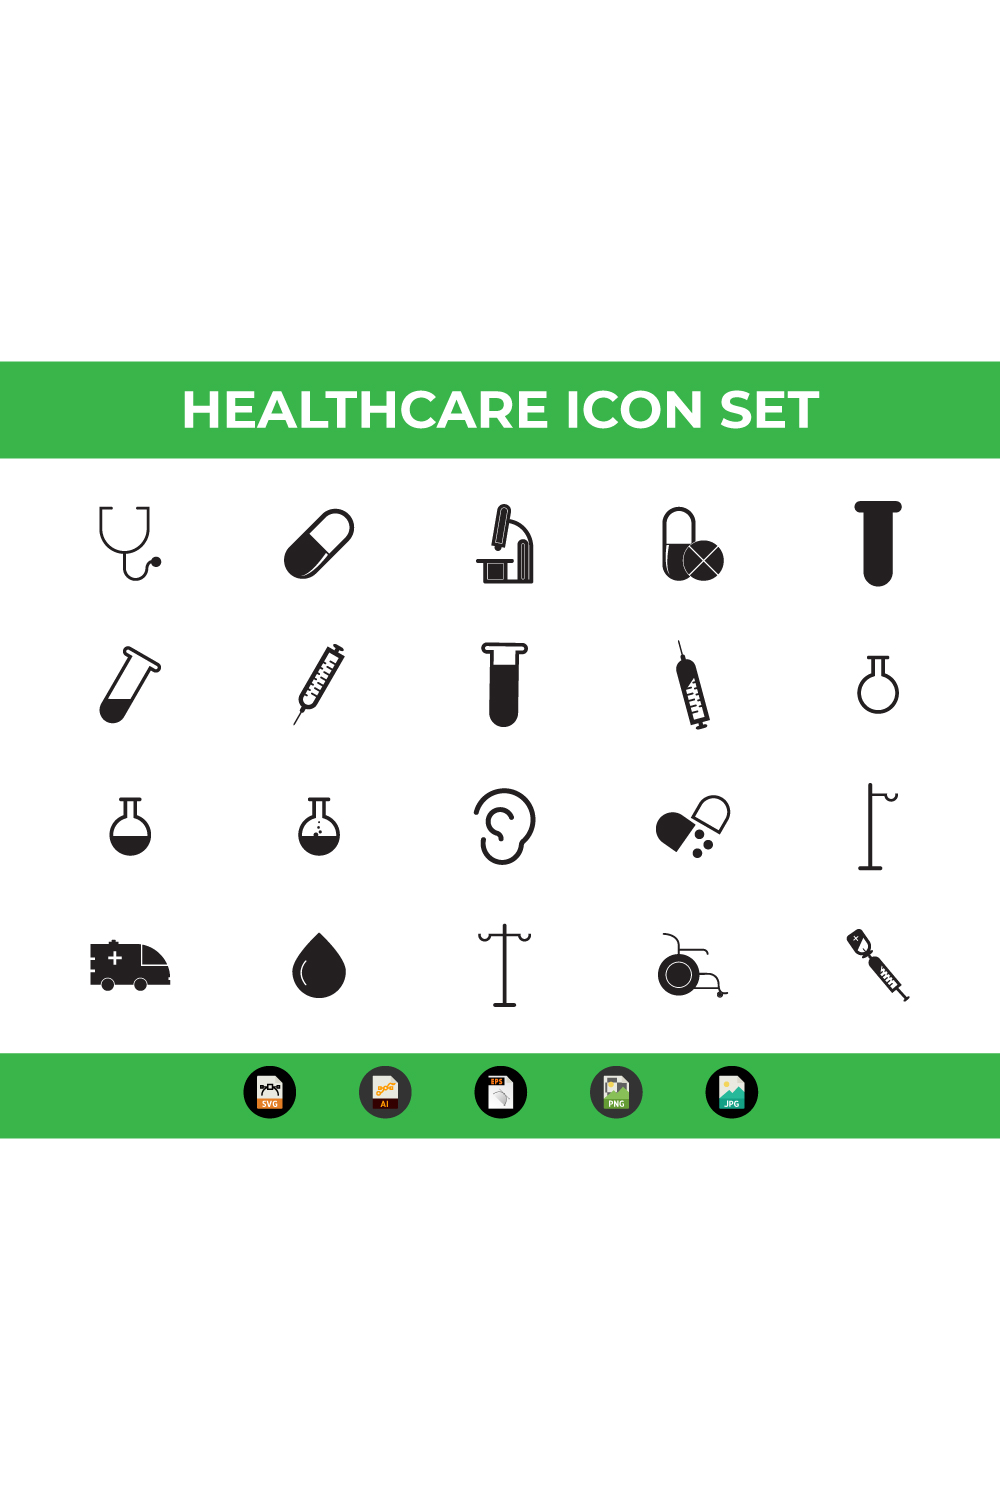 Pinterest images with medical icons set.